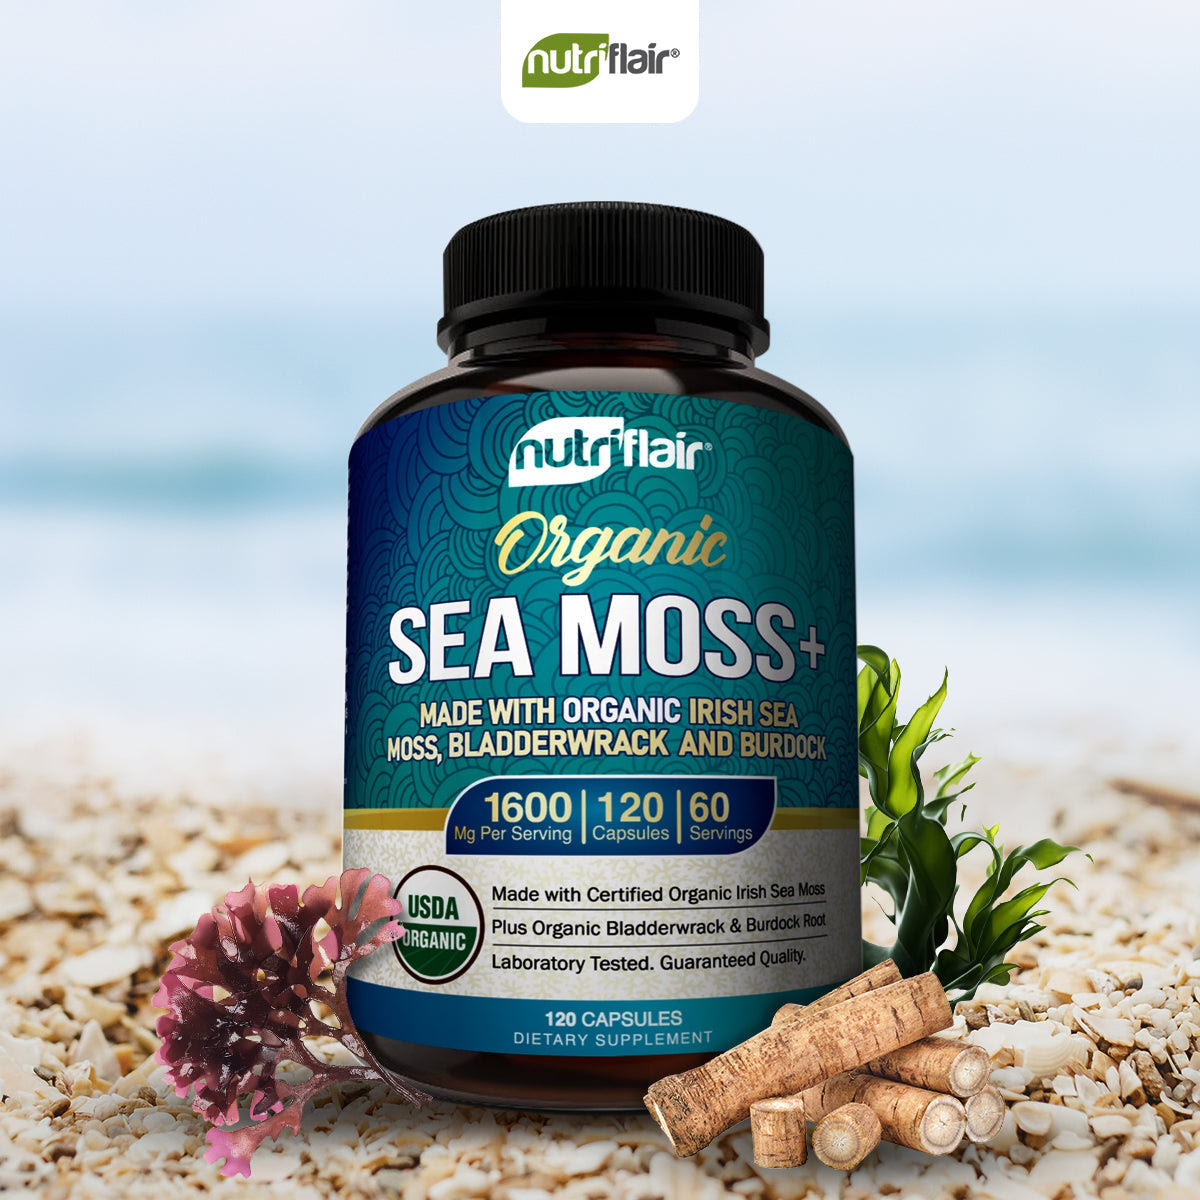 NutriFlair USDA Certified Organic Sea Moss Capsules 1600mg, 120 Capsules - Immunity, Gut, Energy - Superfood Sea Moss Supplements with Raw Sea Moss Powder for Women and Men - image 4 of 8